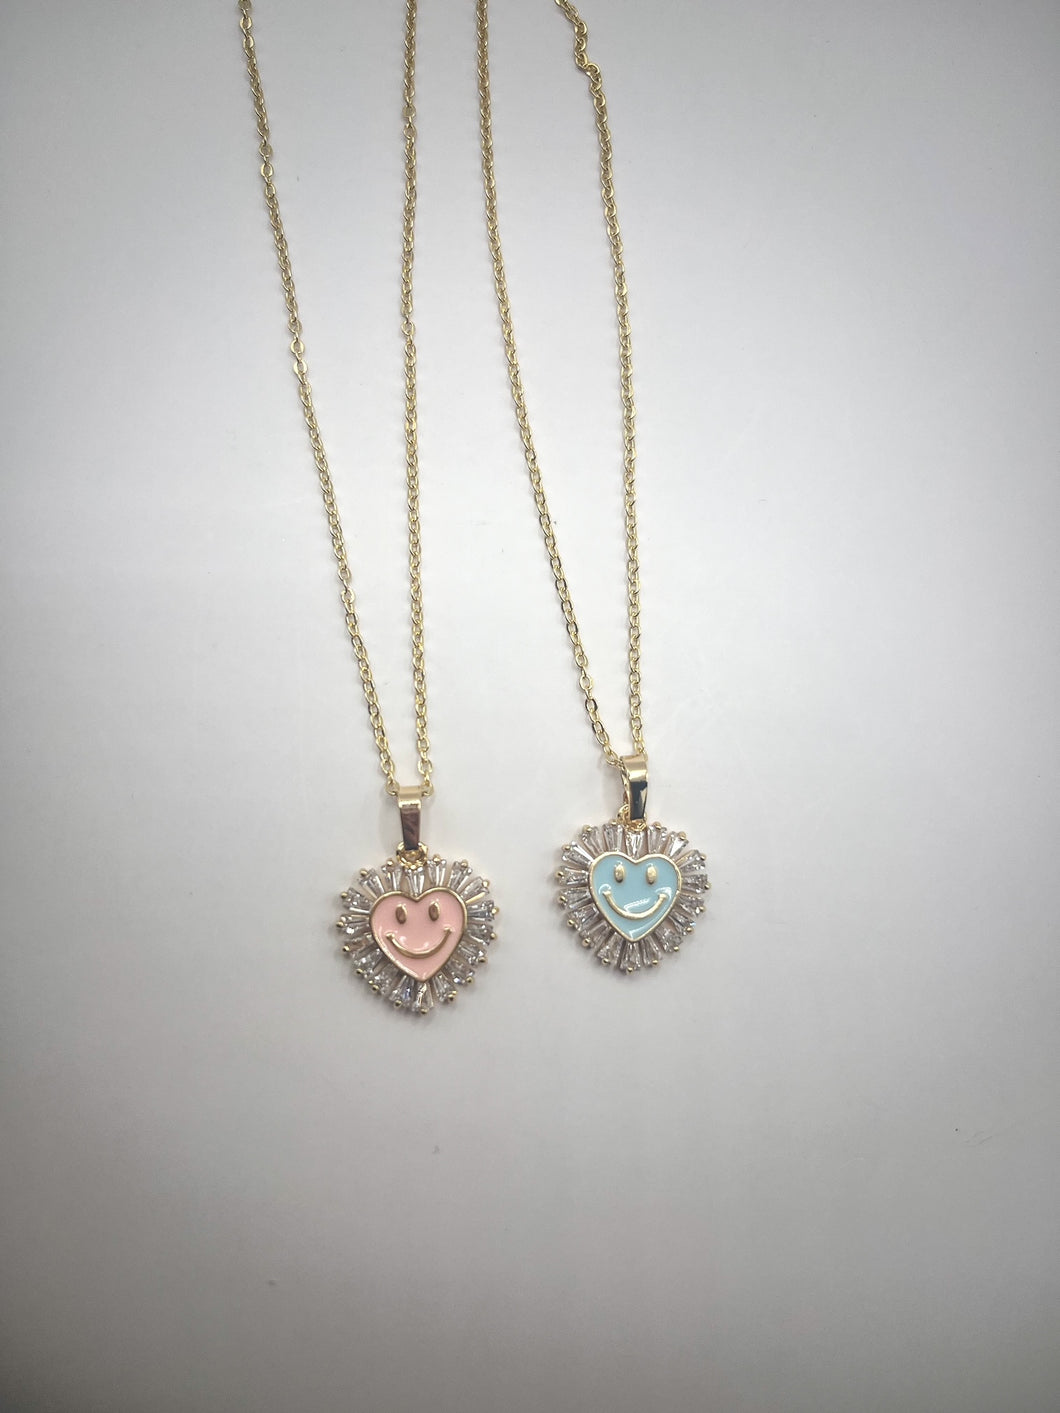 Heart Face Necklace - Gold Filled